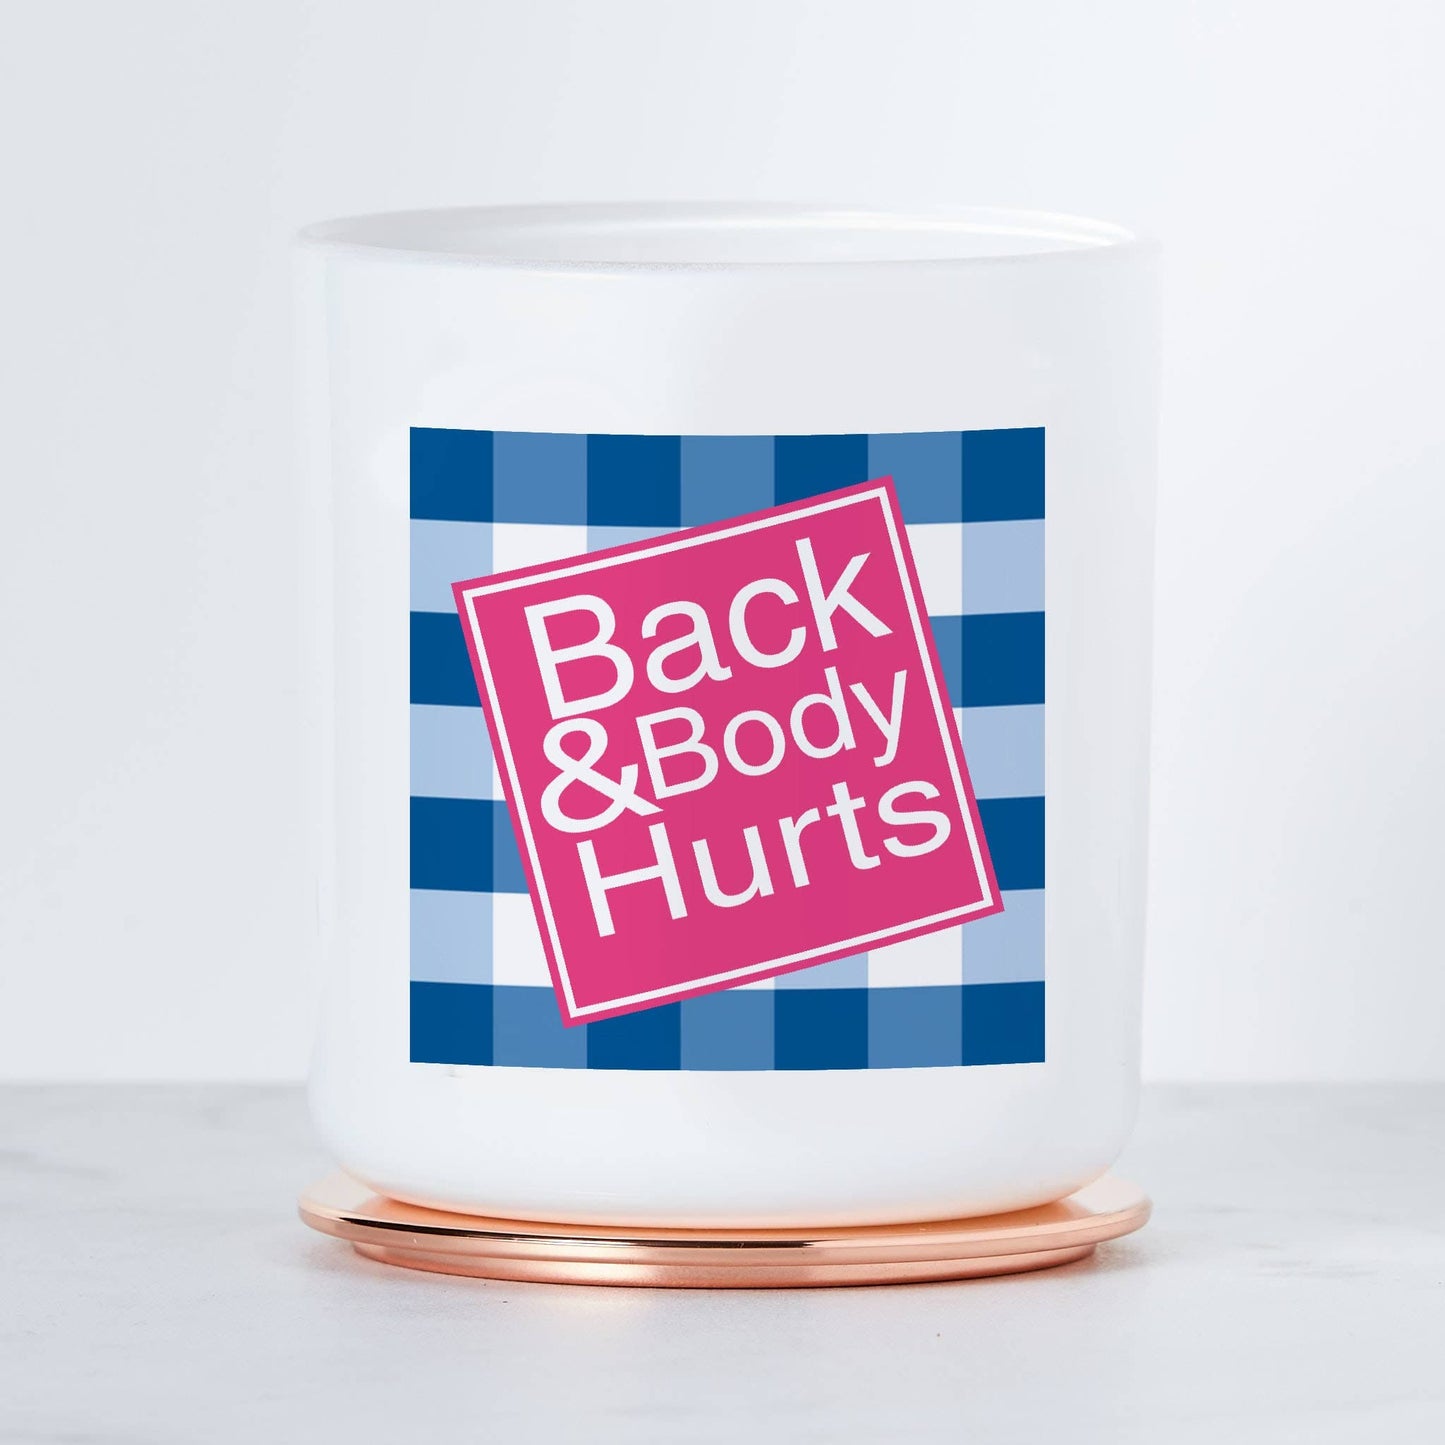 Back & Body Hurts - Luxe Scented Soy Candle